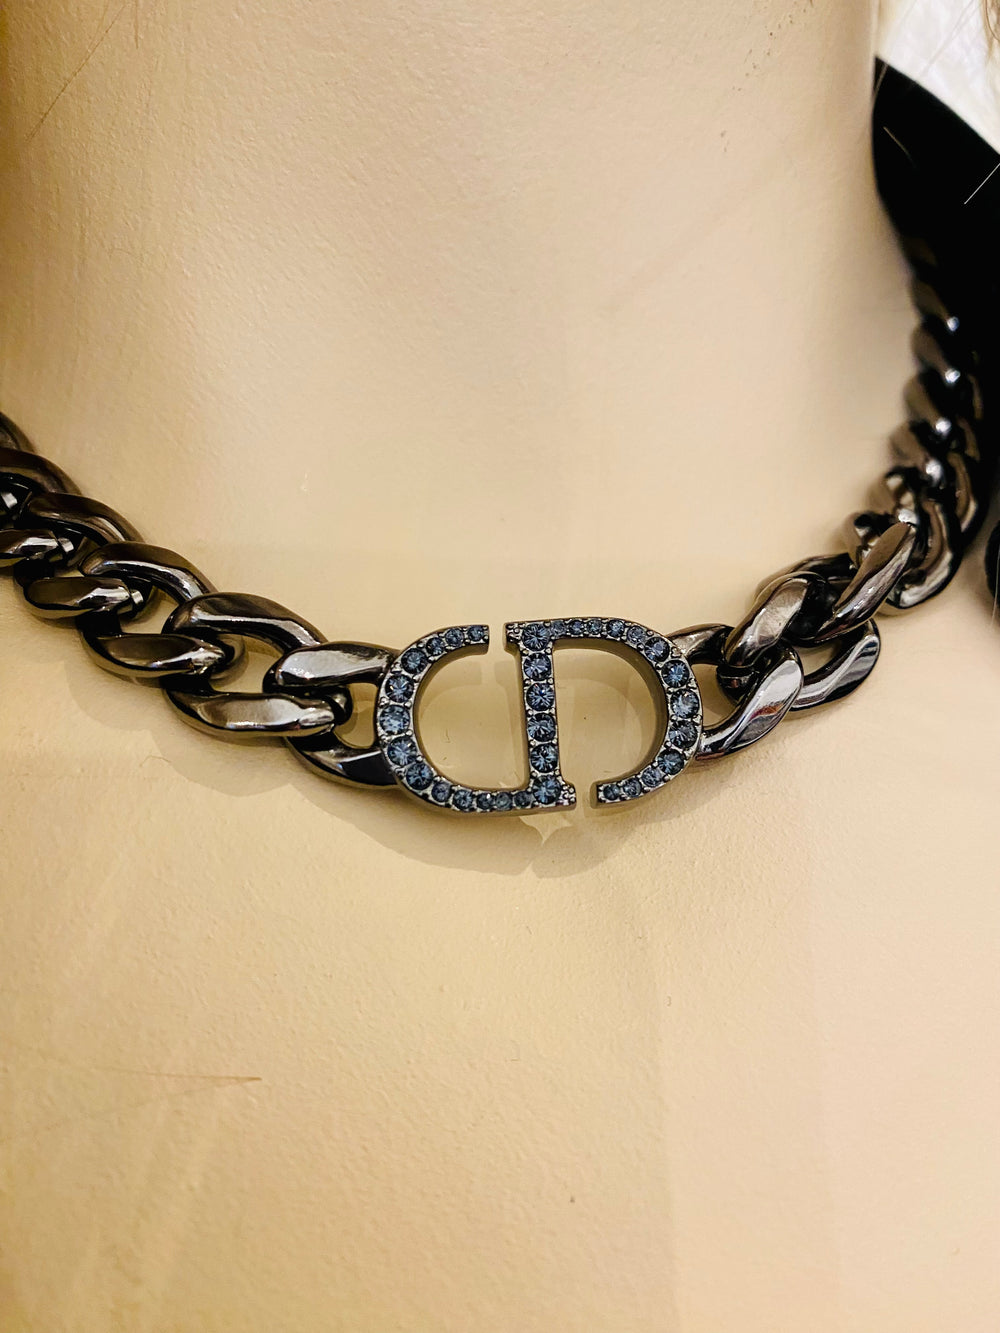 Christian Dior 30 Montaigne Necklace in Rhodium (as new)